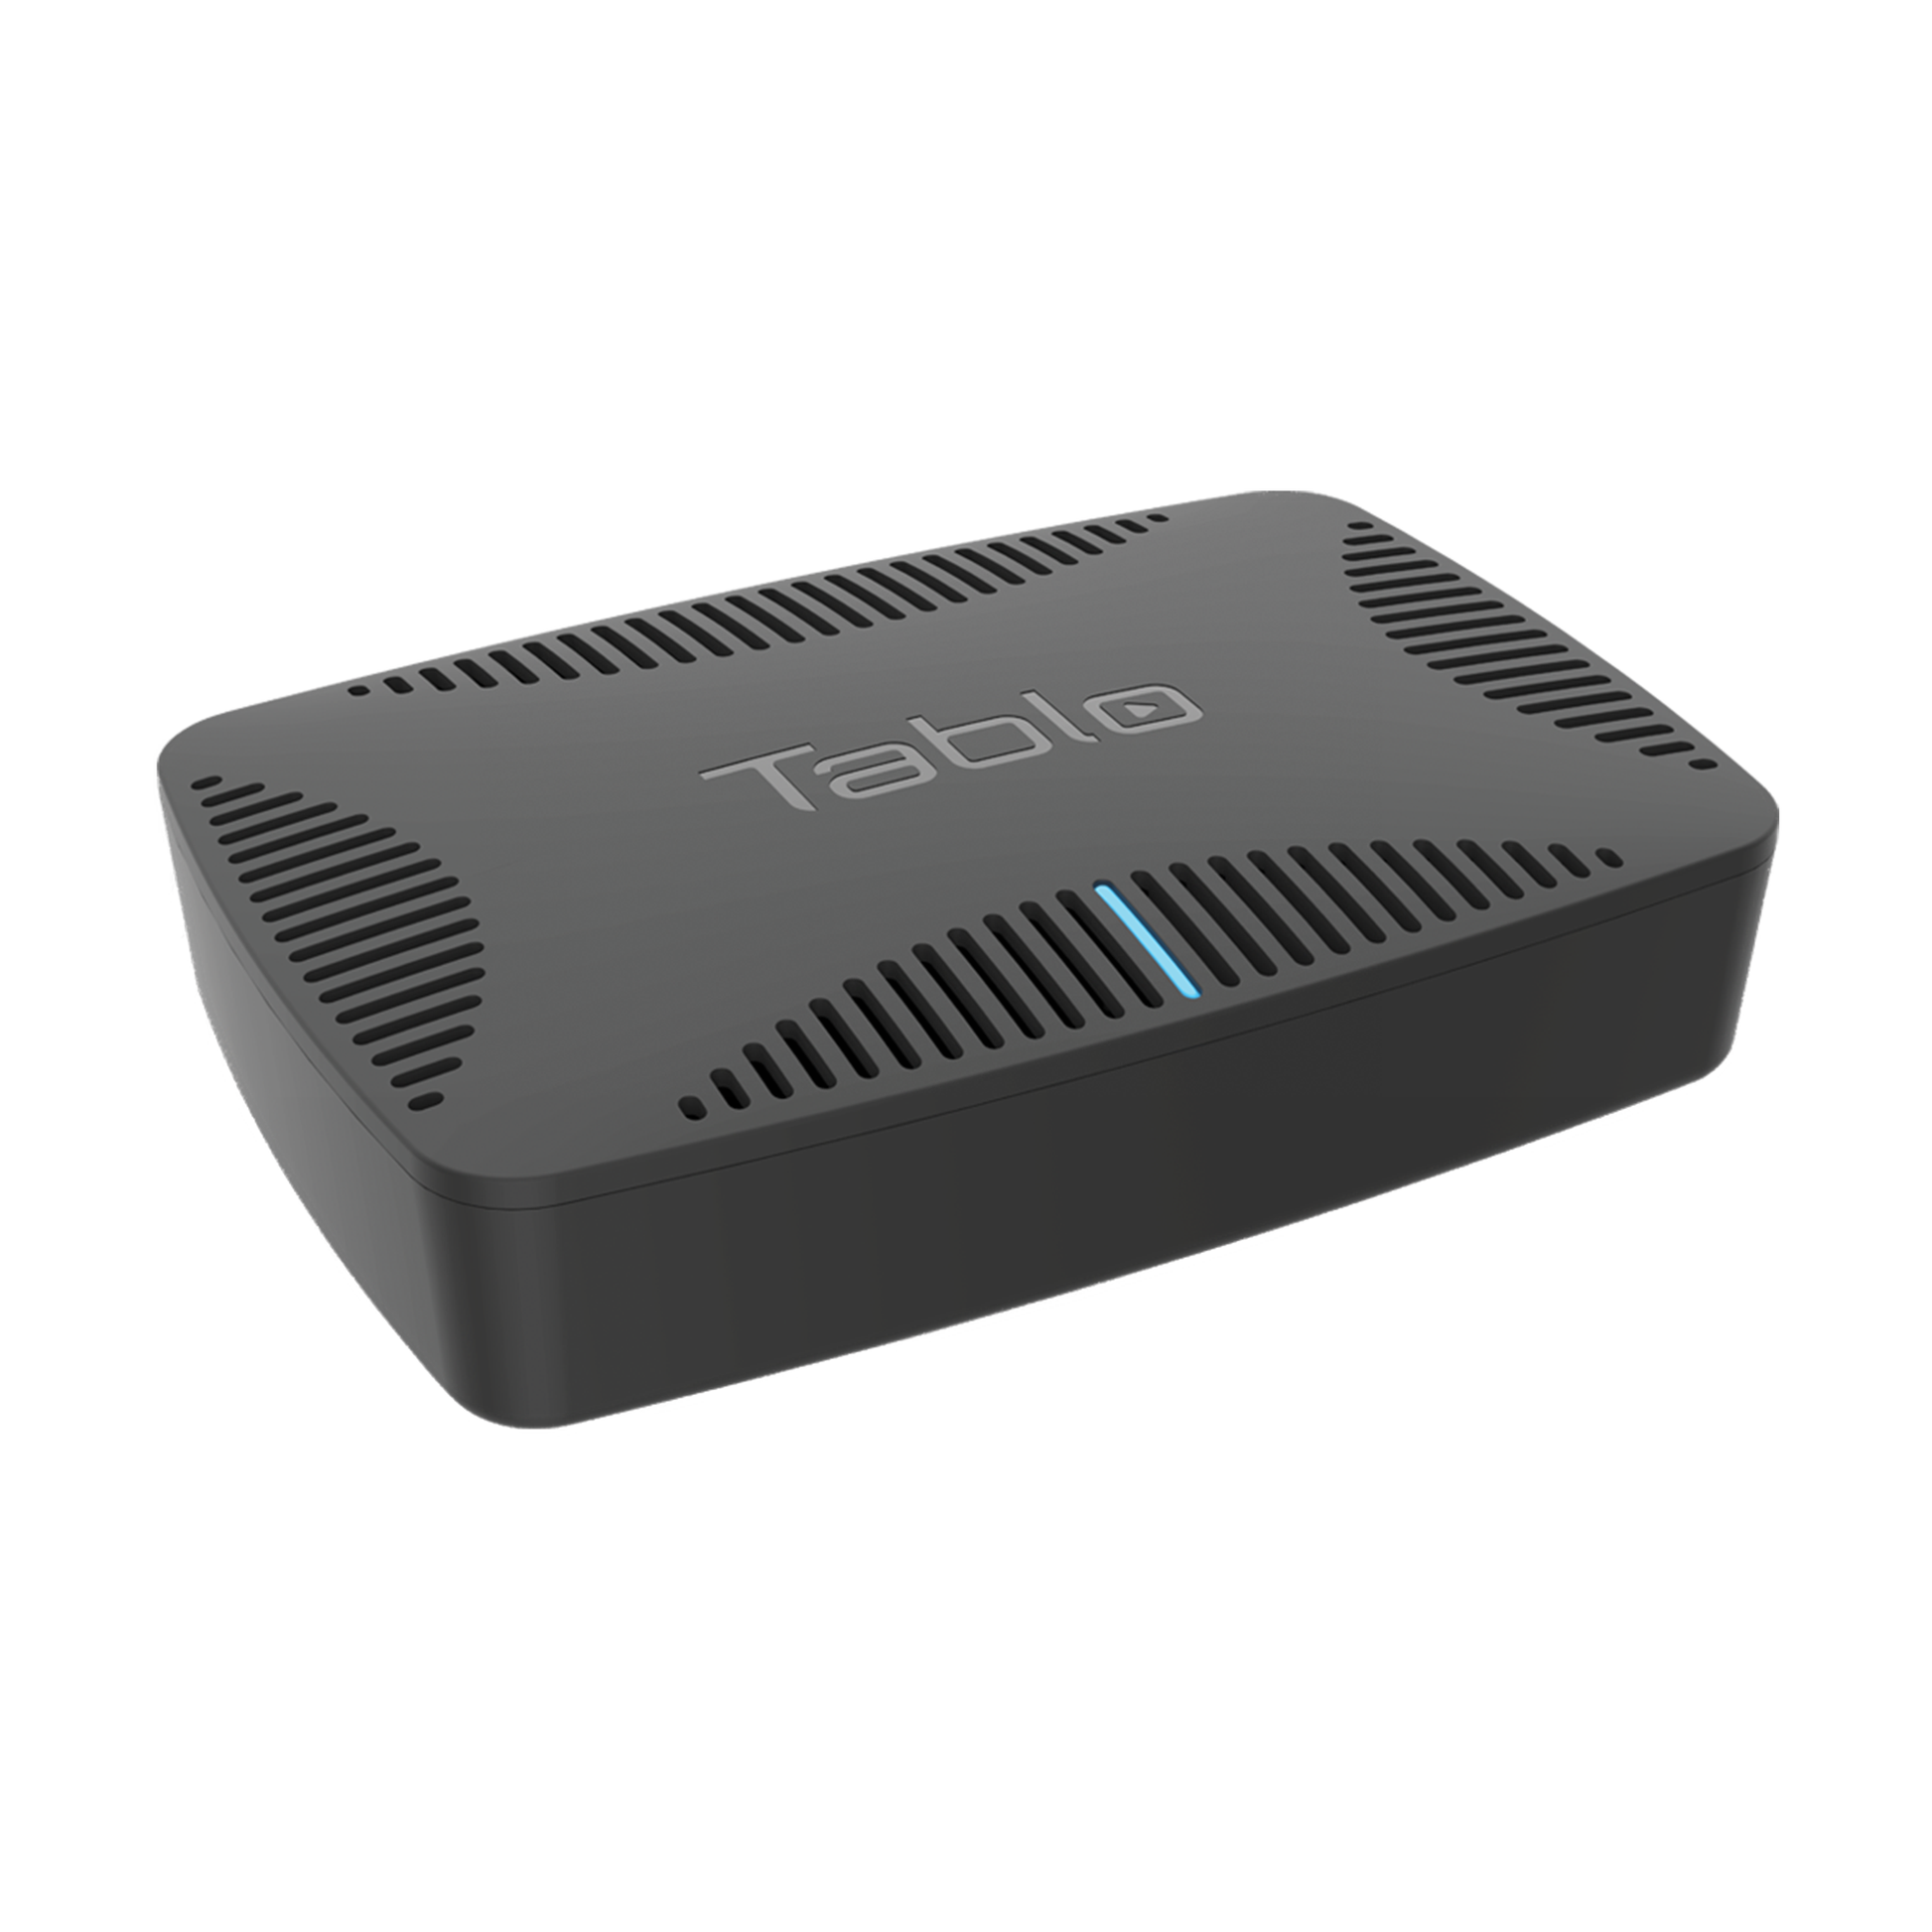 Tablo QUAD Over-The-Air (OTA) DVR (Digital Video Recorder) for Cord Cutters. DVR hardware Front side angle.